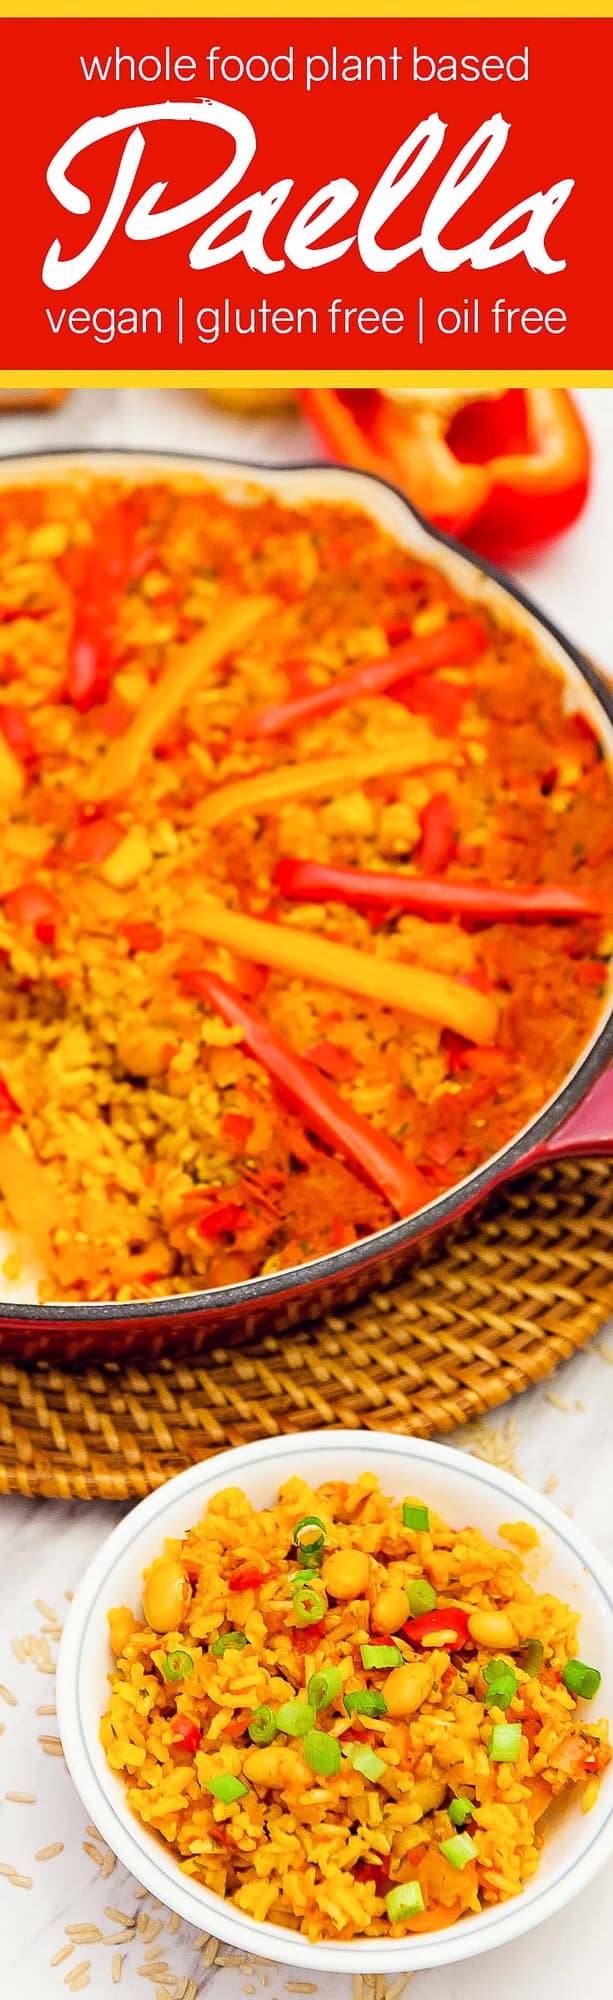 paella, vegan paella, vegetarian paella, whole food plant based paella, oil free paella, gluten free paella, paella recipe, recipe, vegan, vegetarian, whole food plant based, gluten free, oil free, dairy free, wfpb, dinner, lunch, rice, brown rice, peppers, beans, easy, simple, healthy, side, side dish,